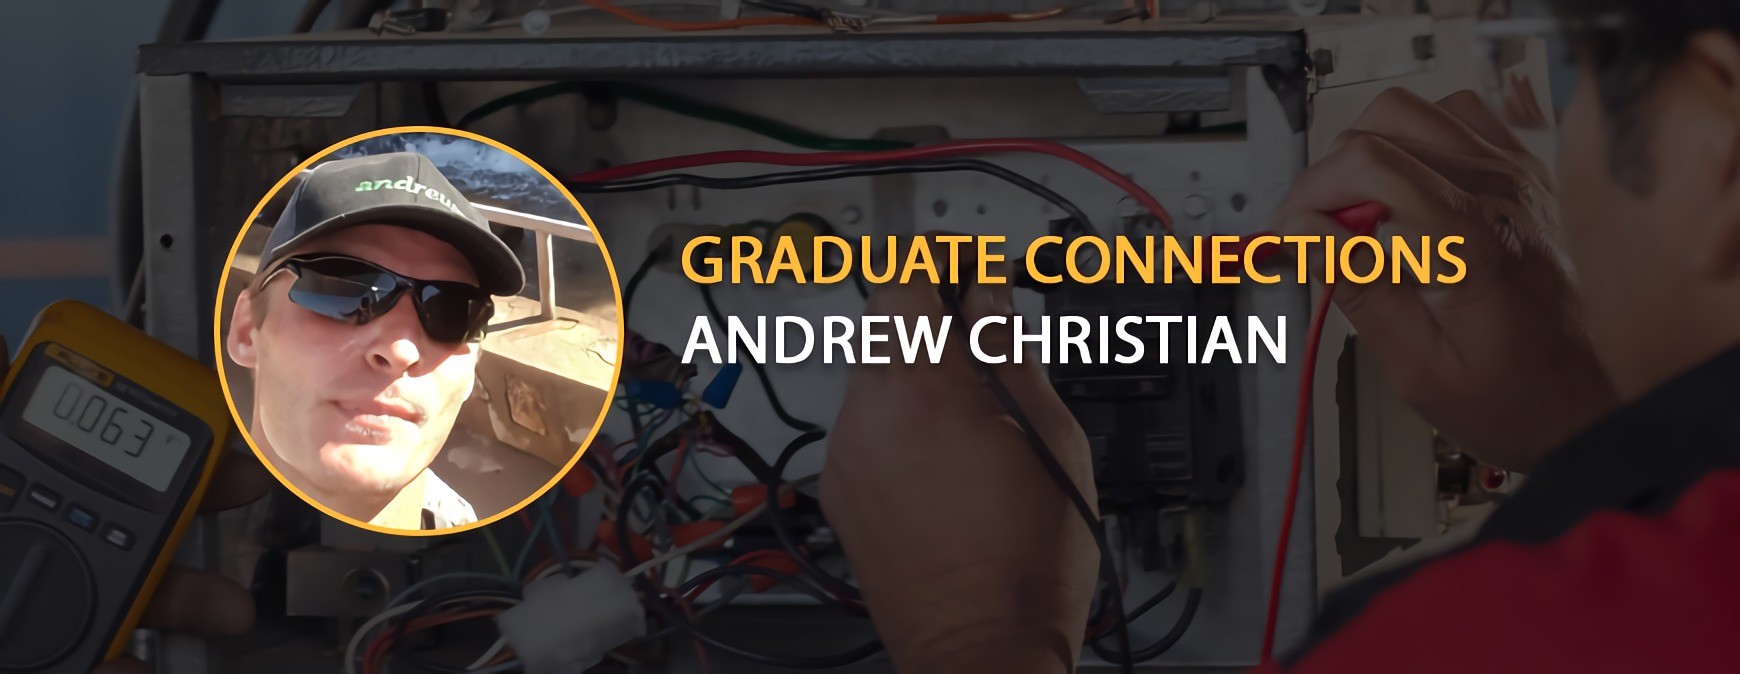 Andrew Christian Graduate Connection